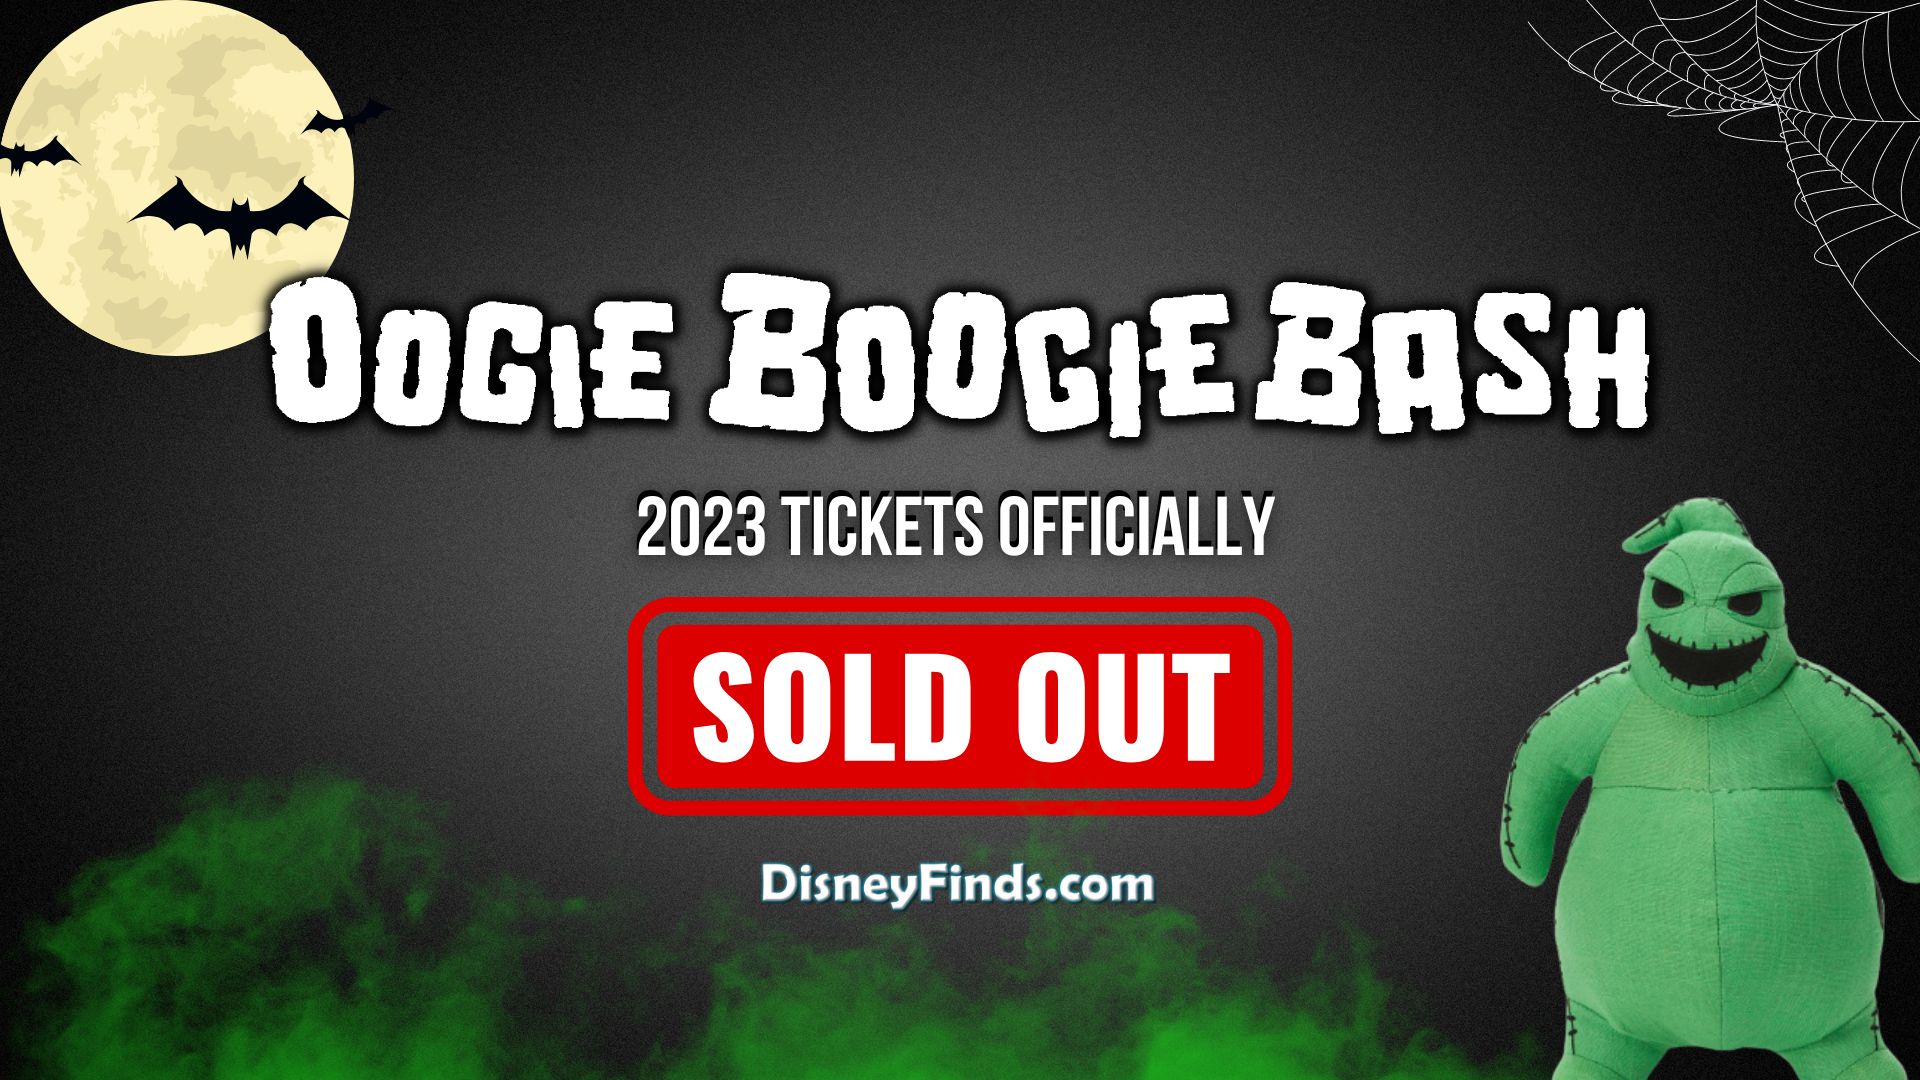 Oogie Boogie Bash 2023 Tickets Officially Sold Out A Magical Halloween